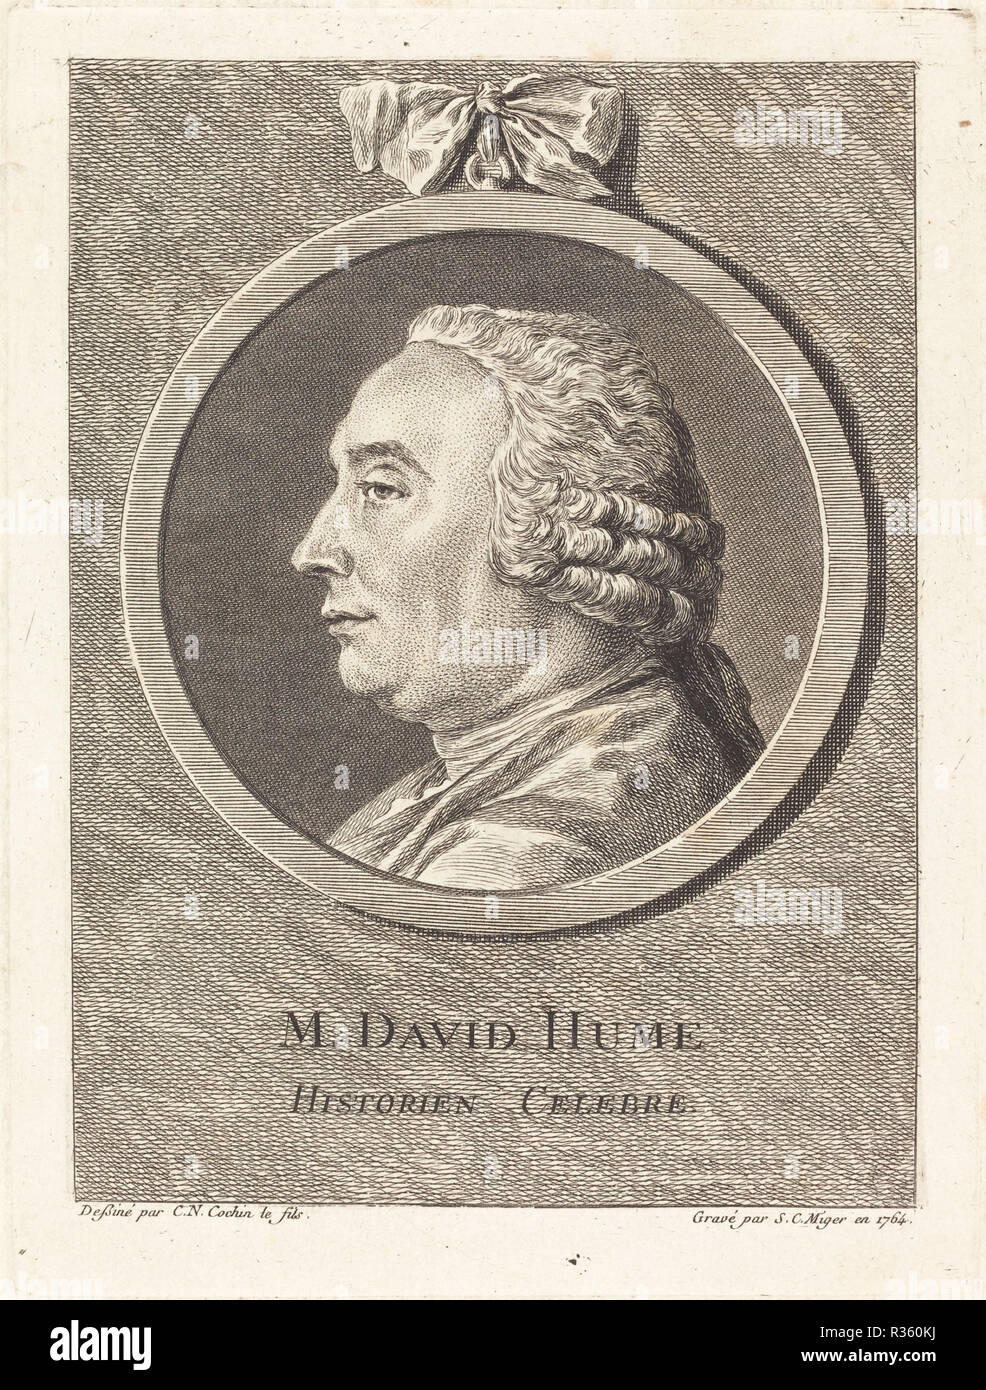 M. David Hume. Dated: 1764. Dimensions: plate: 19.4 x 14.5 cm (7 5/8 x 5 11/16 in.)  sheet: 23.1 x 17.4 cm (9 1/8 x 6 7/8 in.). Medium: engraving on laid paper [second state]. Museum: National Gallery of Art, Washington DC. Author: Simon Charles Miger after Charles-Nicolas Cochin II. Stock Photo